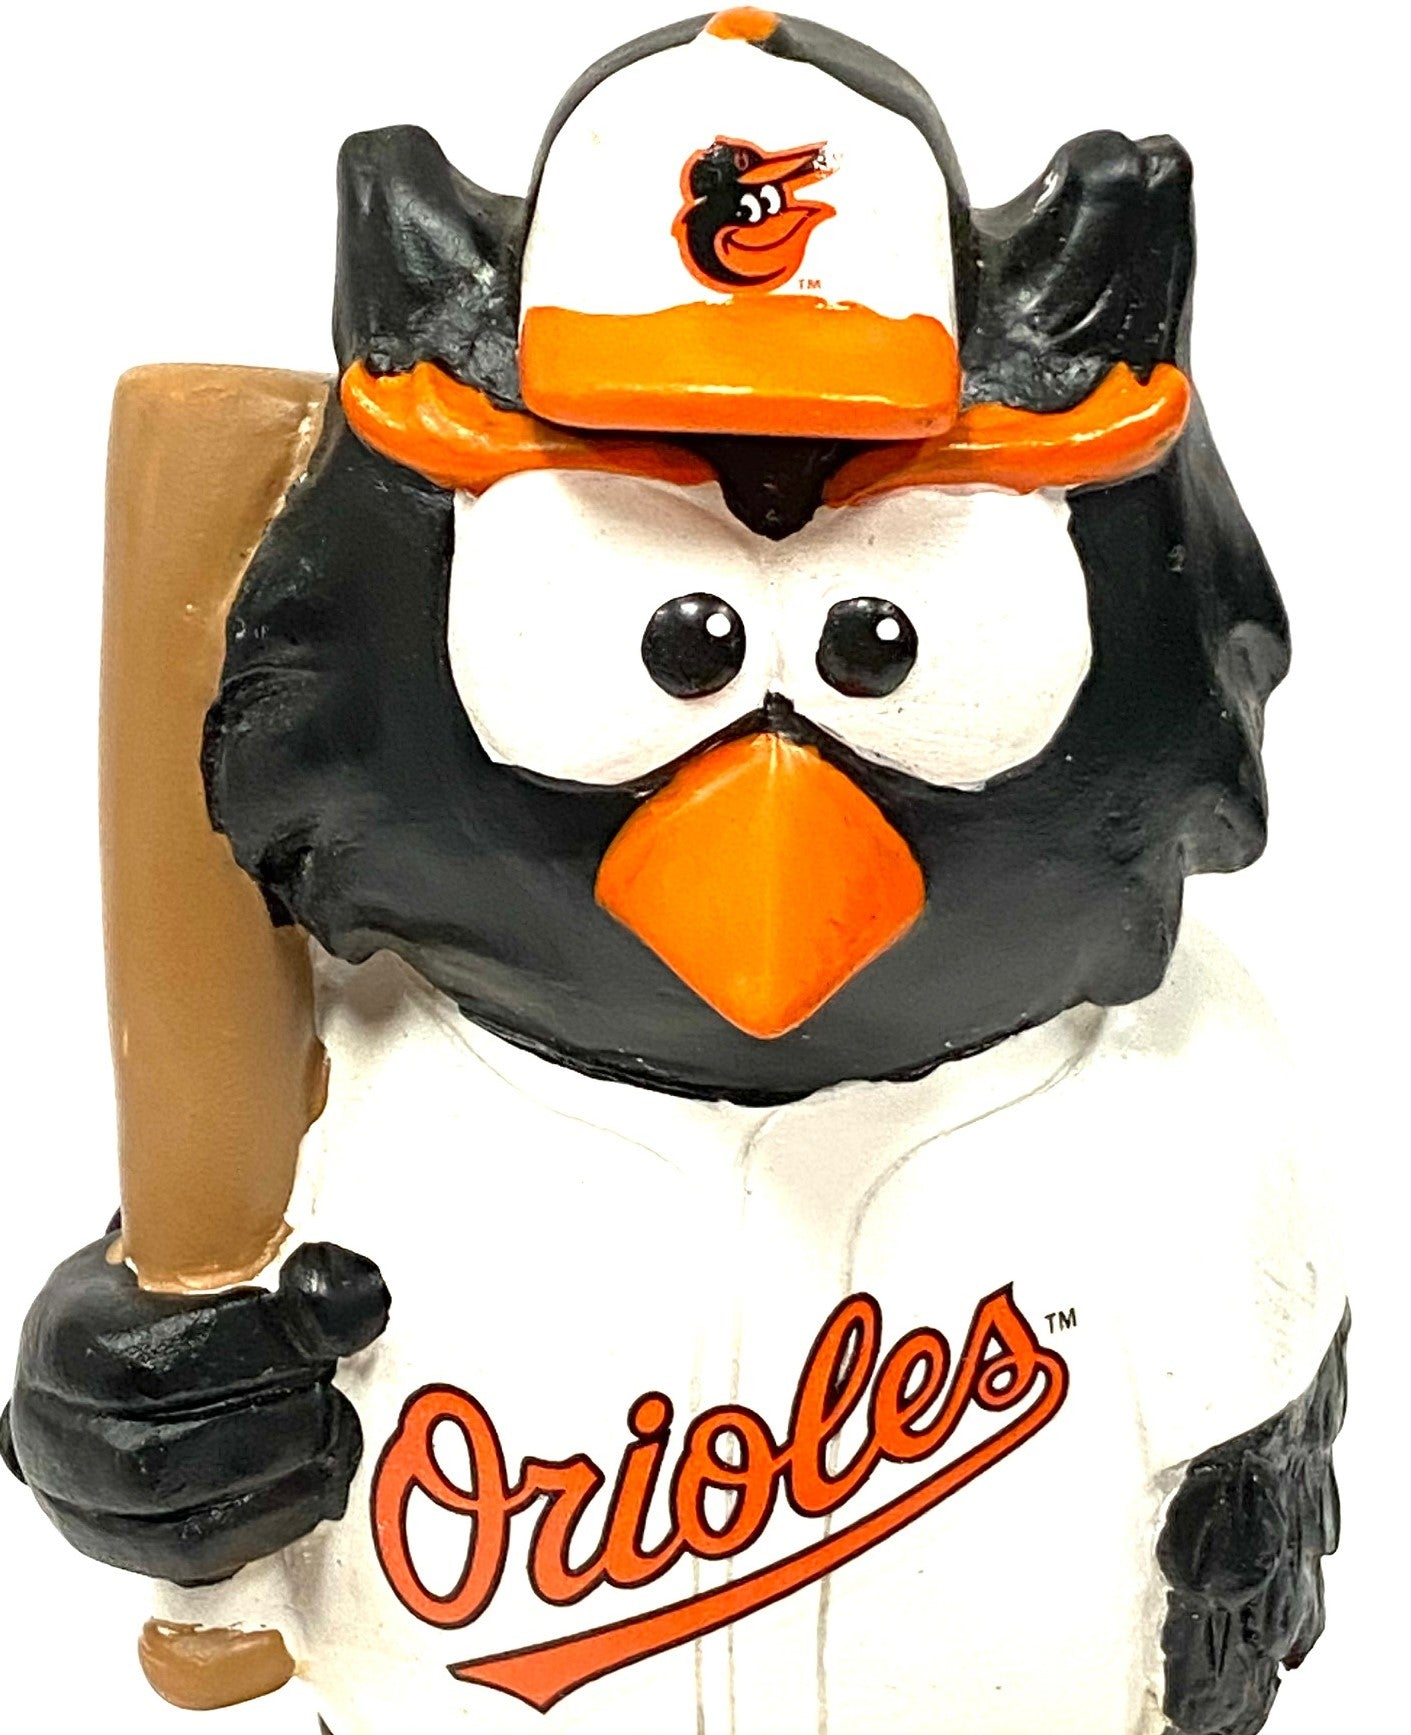 Baltimore Orioles 2013 Resin Mascot Perched on Ball Team Beans (Used) by Forever Collectibles